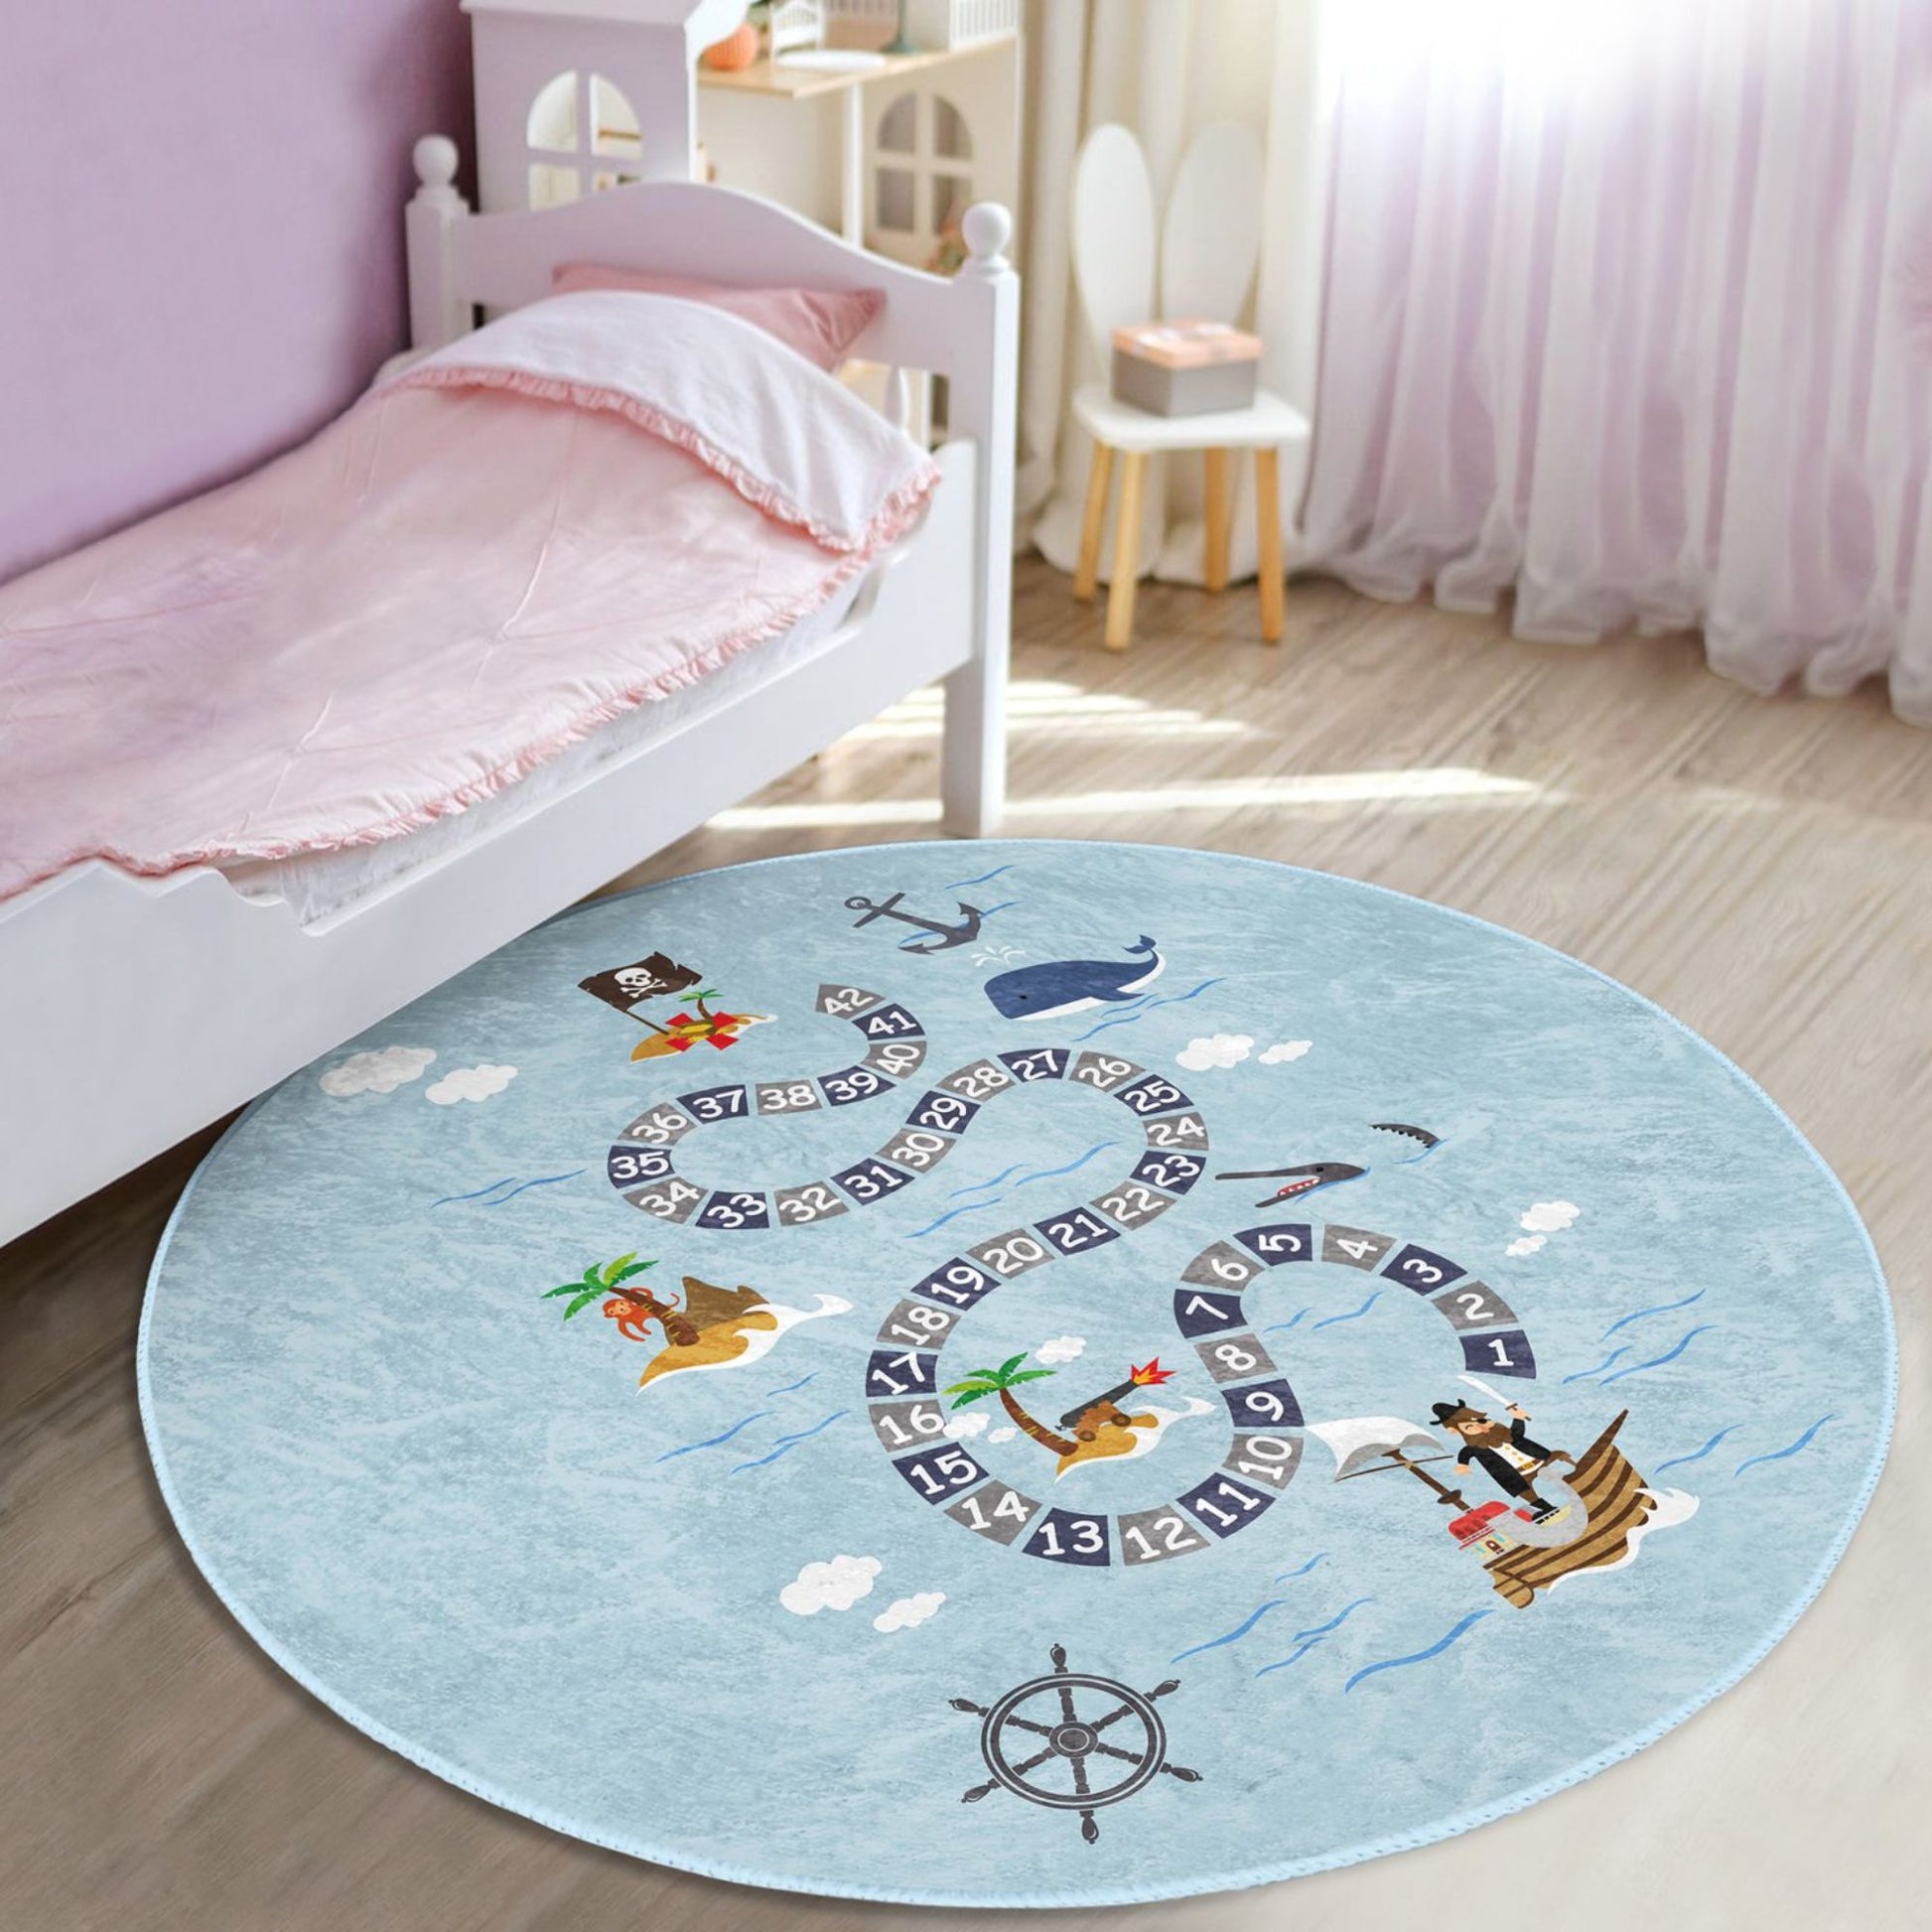 Rug with Blue Whale Design for Kids' Play Area